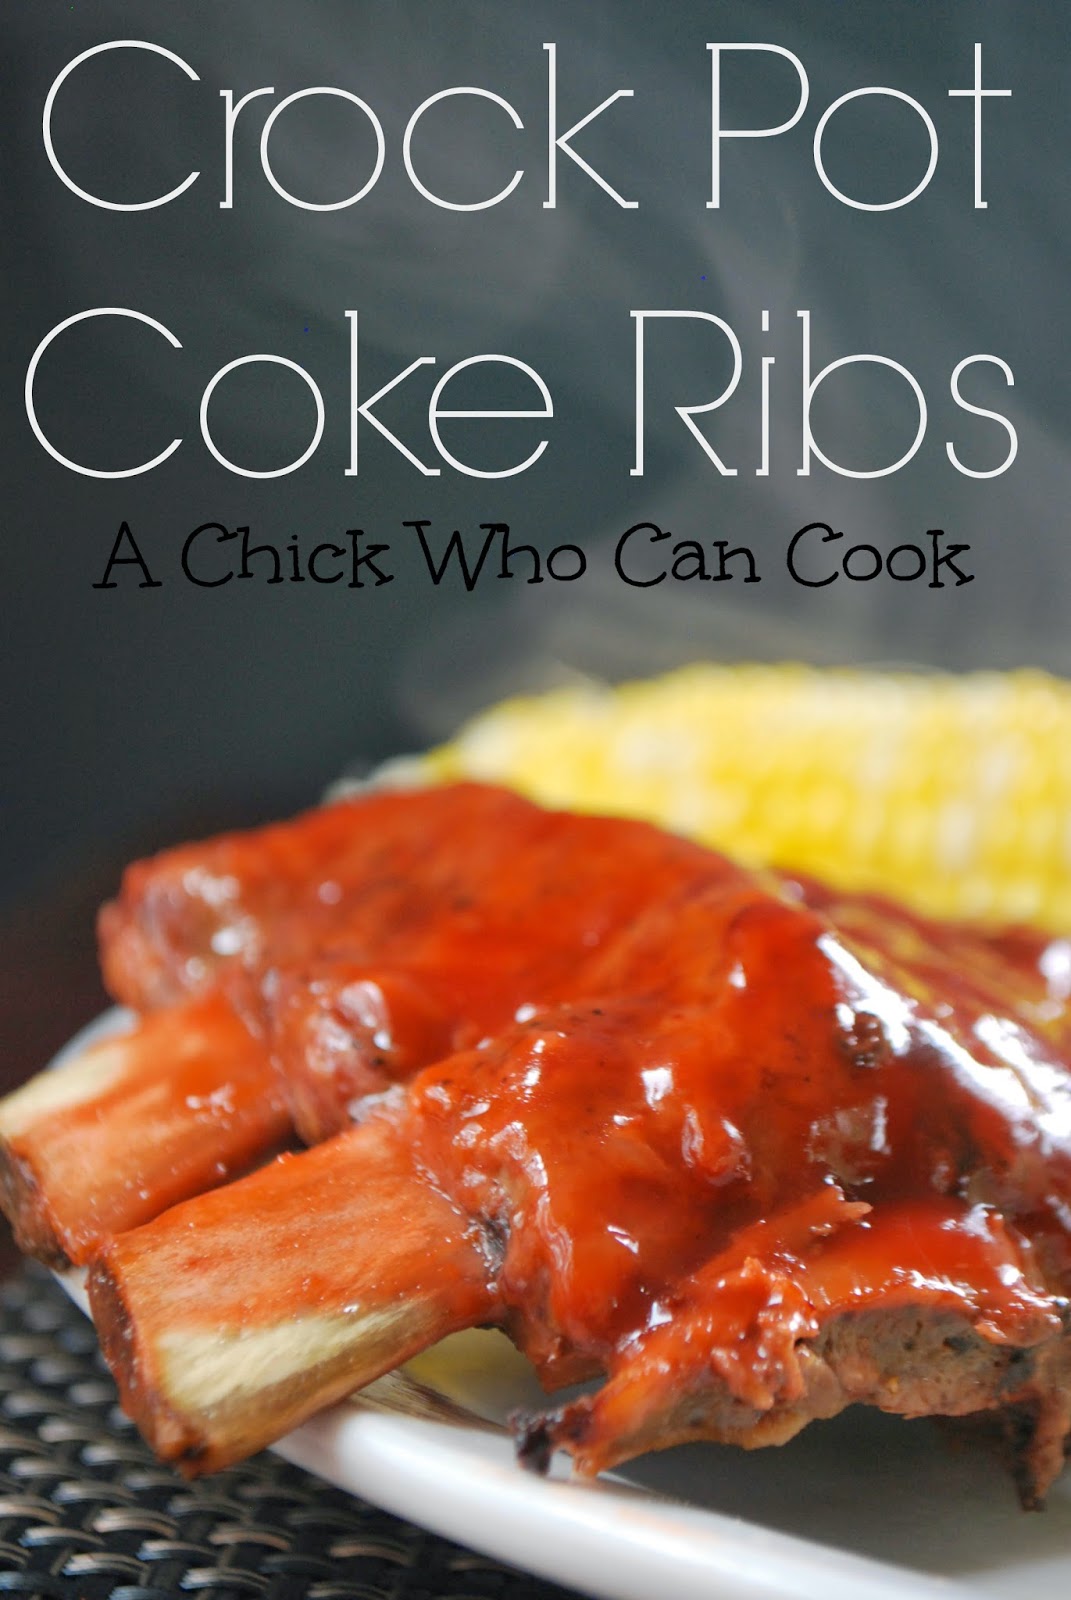 A Chick Who Can Cook: Crock Pot Coke Ribs